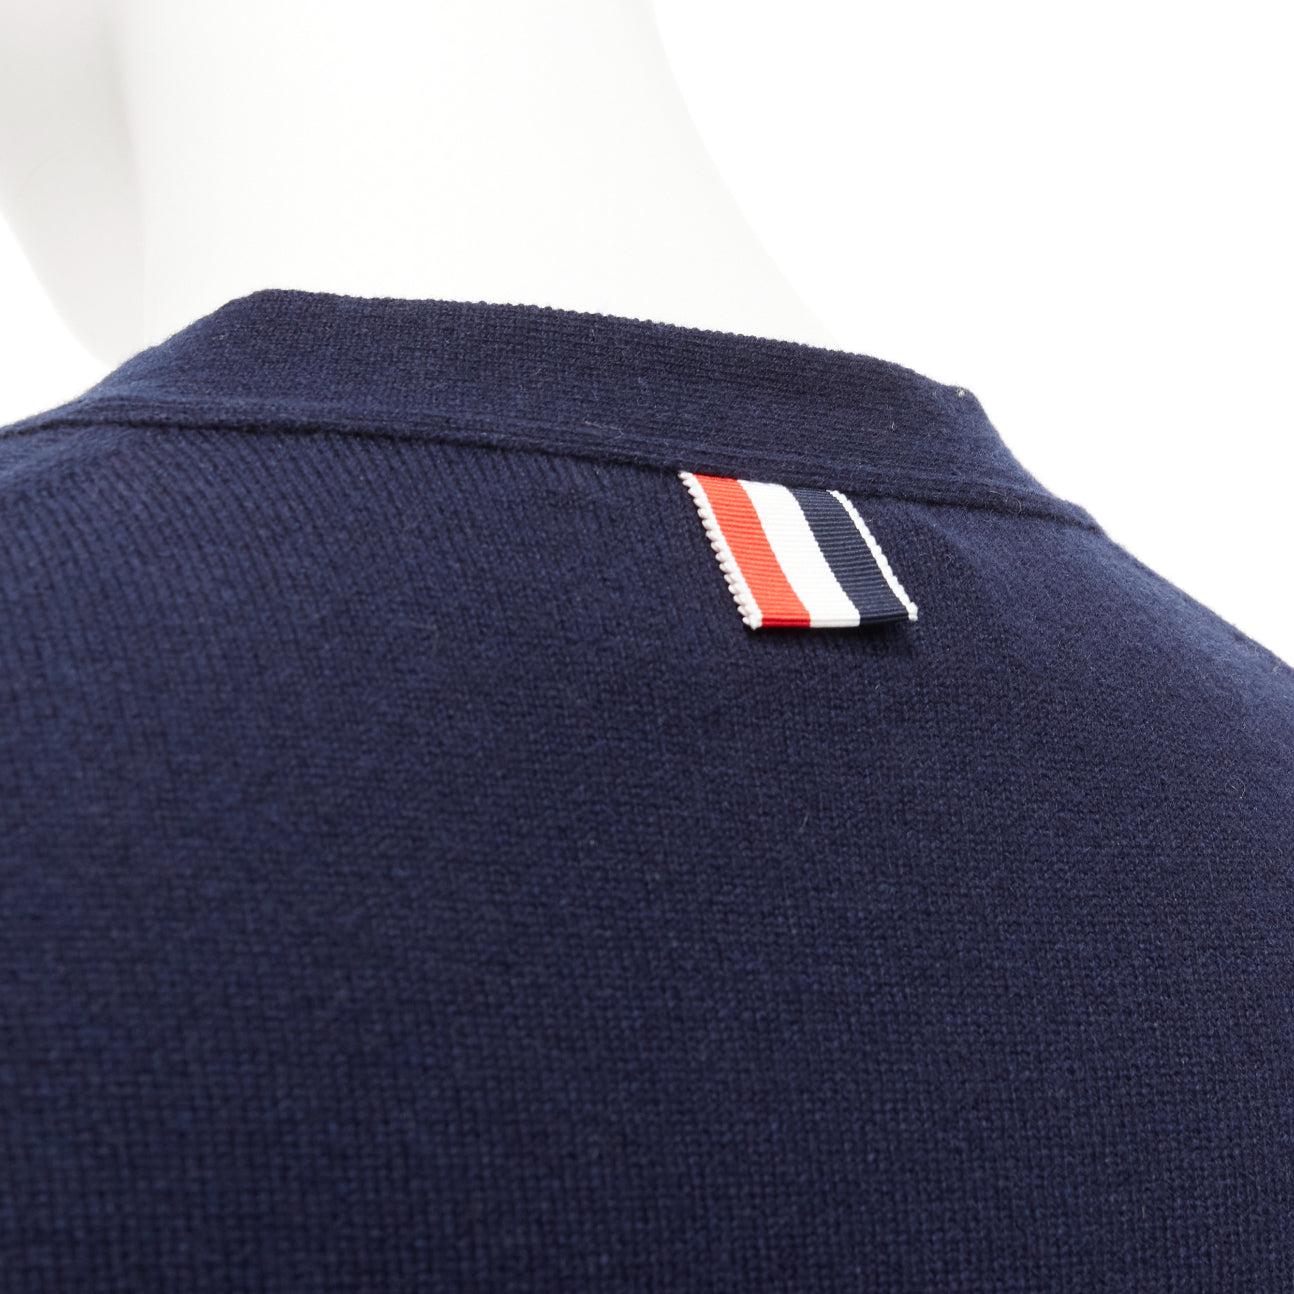 THOM BROWNE 100% cashmere navy white 4 bar stripe button side cardigan IT44 L
Reference: DYTG/A00037
Brand: Thom Browne
Designer: Thom Browne
Material: Cashmere
Color: Navy, White
Pattern: Striped
Closure: Button
Extra Details: Thom Browne signature